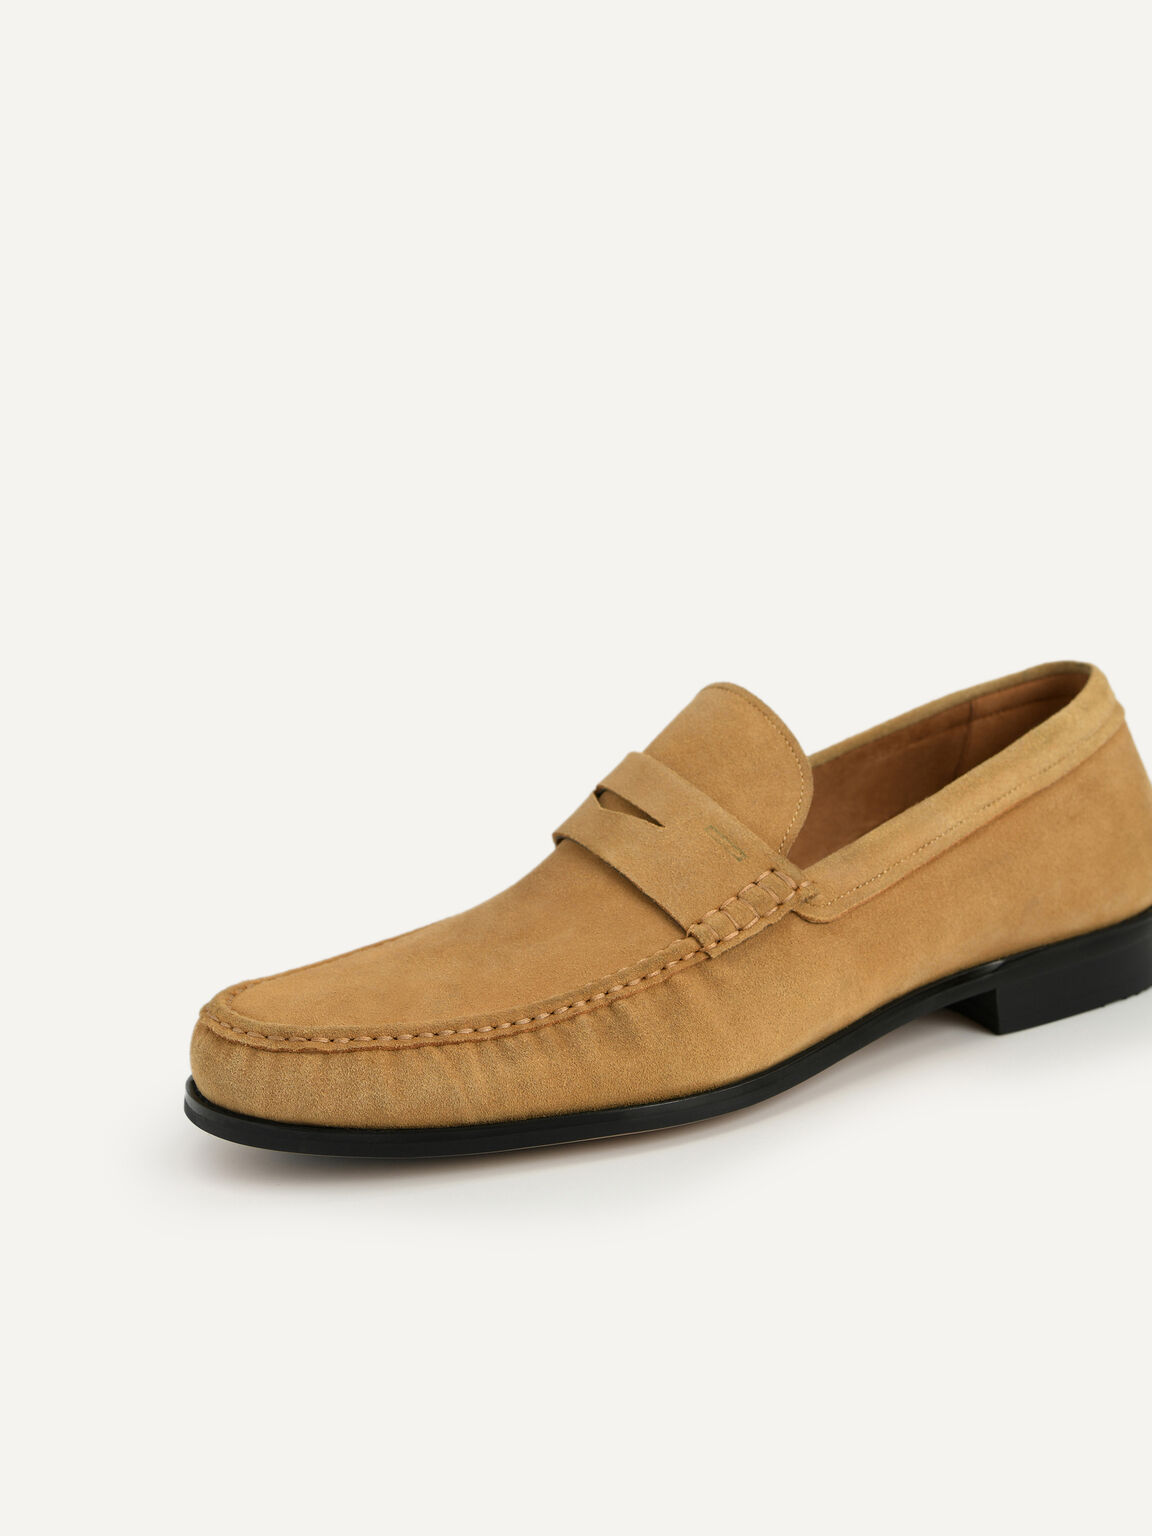 Suede Penny Moccasins, Sand